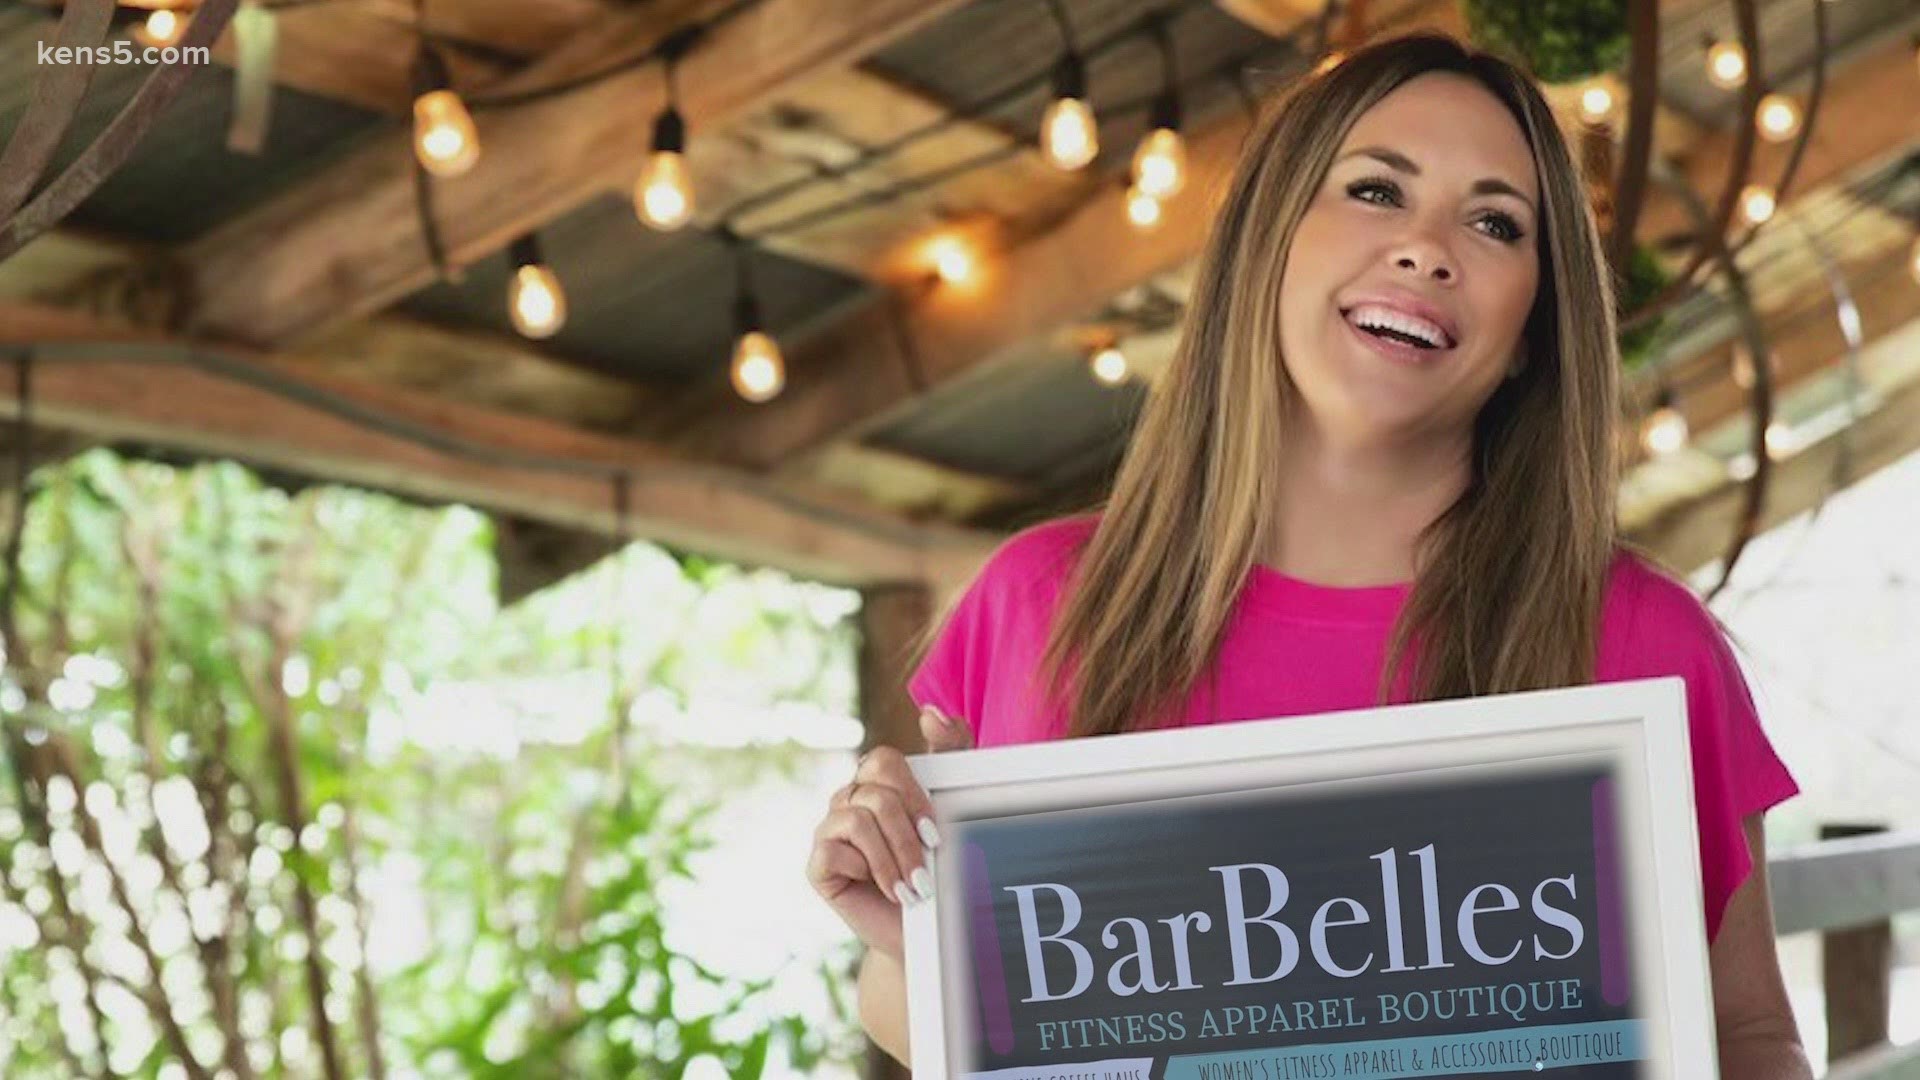 This year, BarBelles Boutique is letting customers shop small on Cyber Monday. The idea was another new way the owner is trying to stay in business.